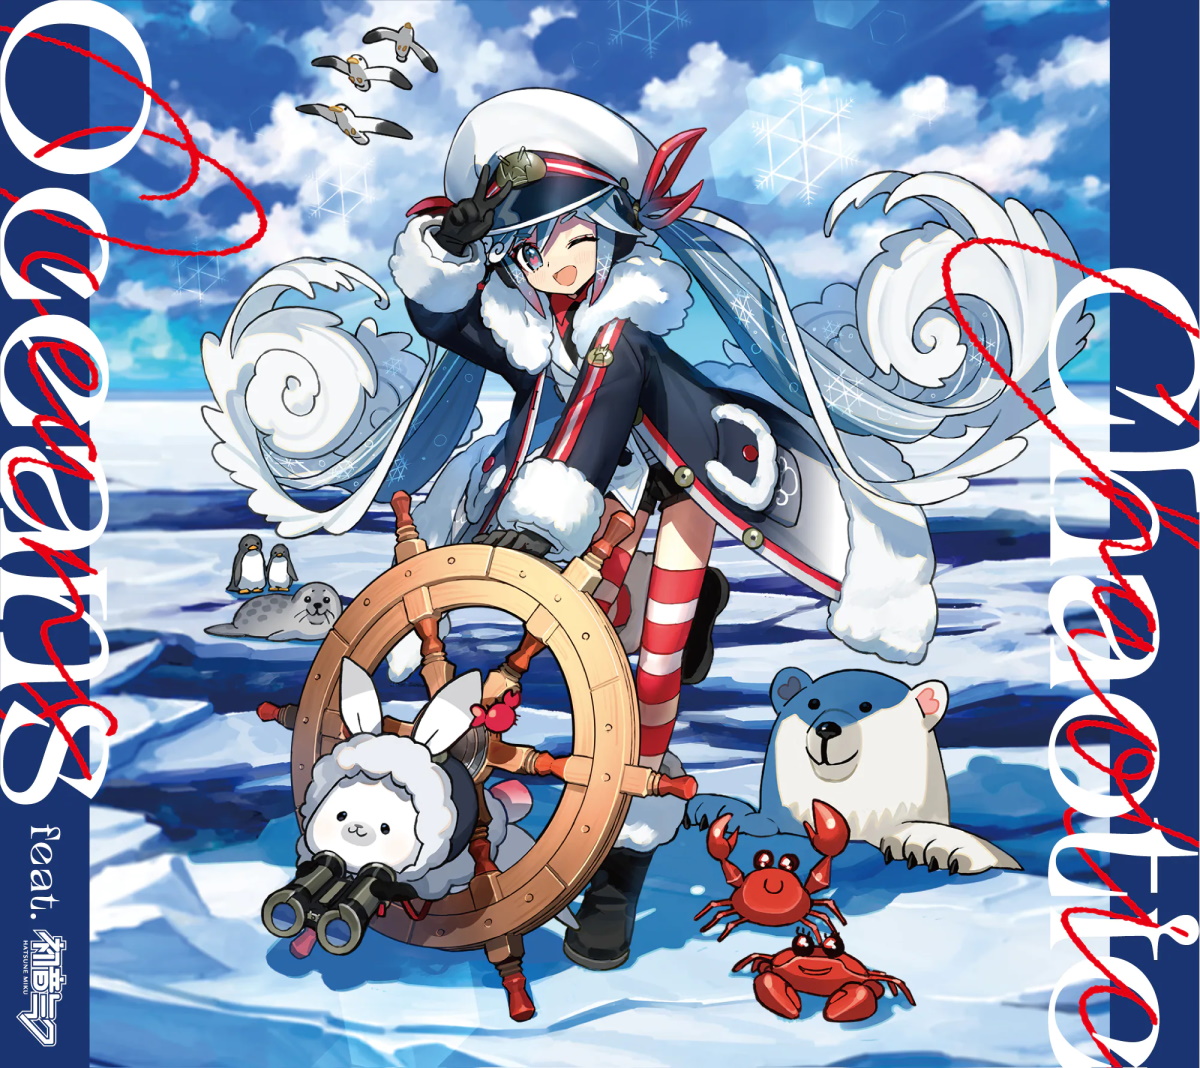 Cover for『ATOLS - Nami no Hana』from the release『Chaotic Oceans feat. Hatsune Miku』